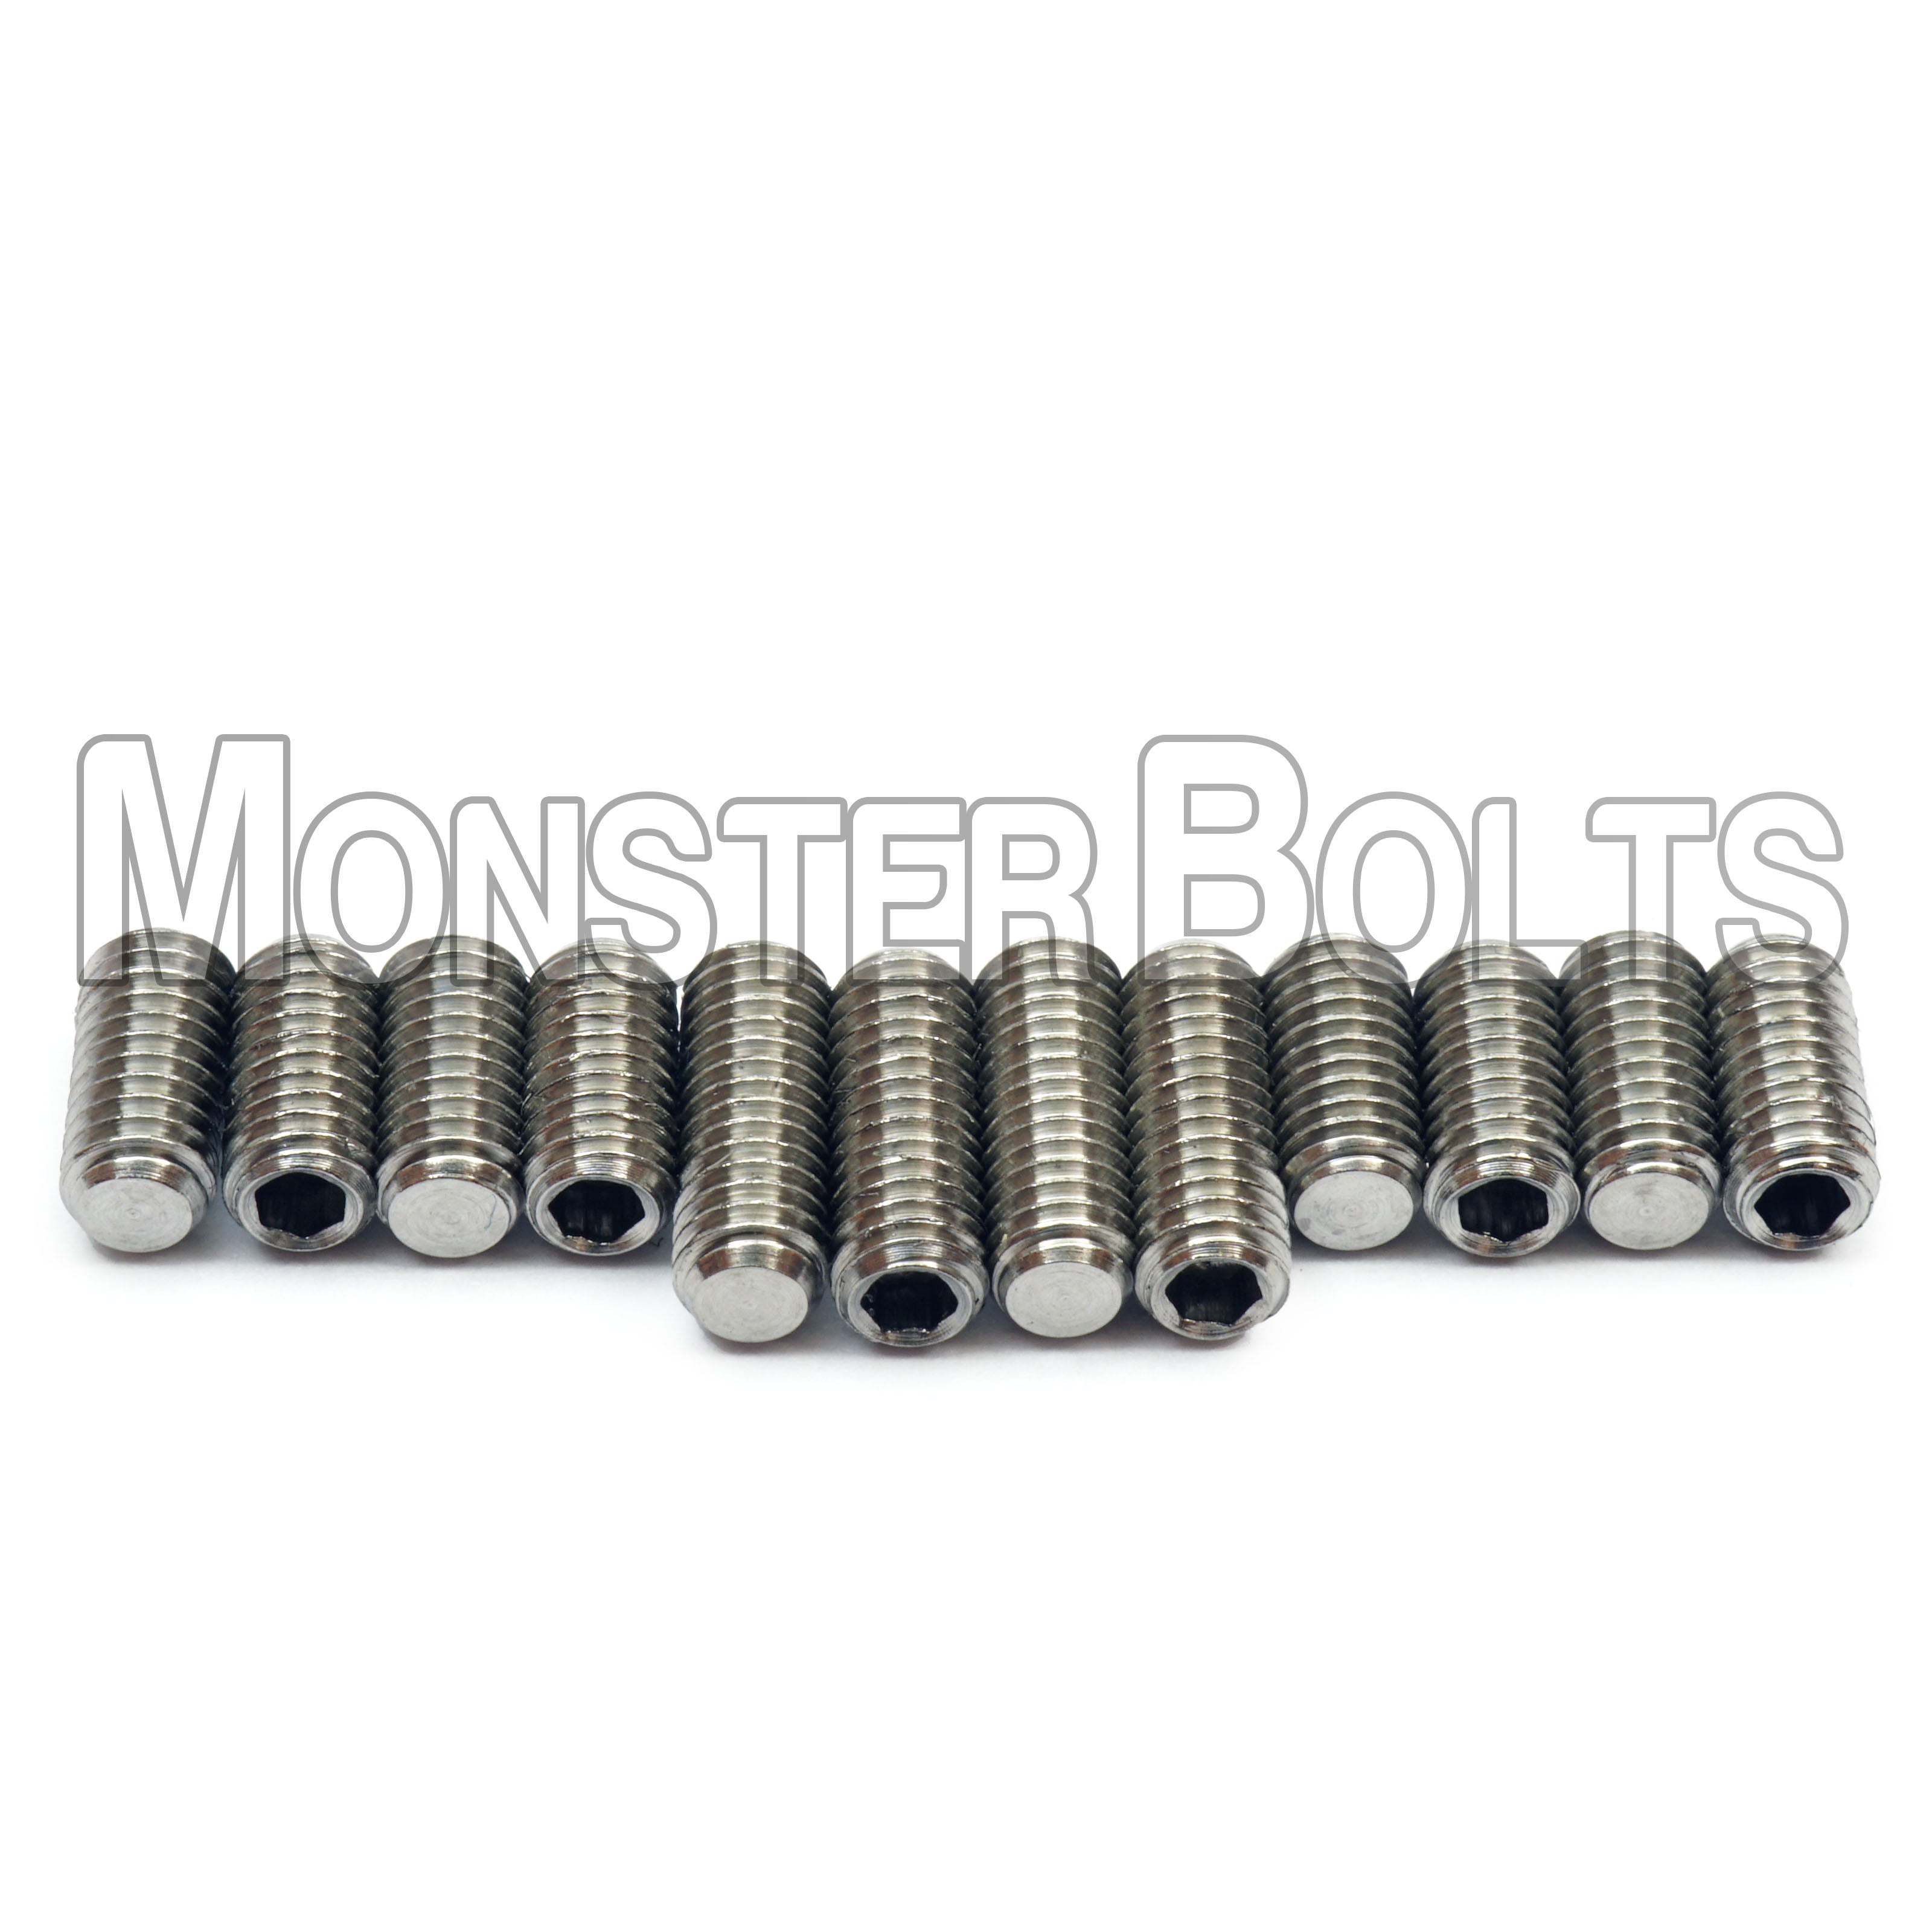 M6 6mm STAINLESS STEEL A2 DOME HEAD CUP NUTS TO FIT BOLTS AND SCREWS FREE POST 